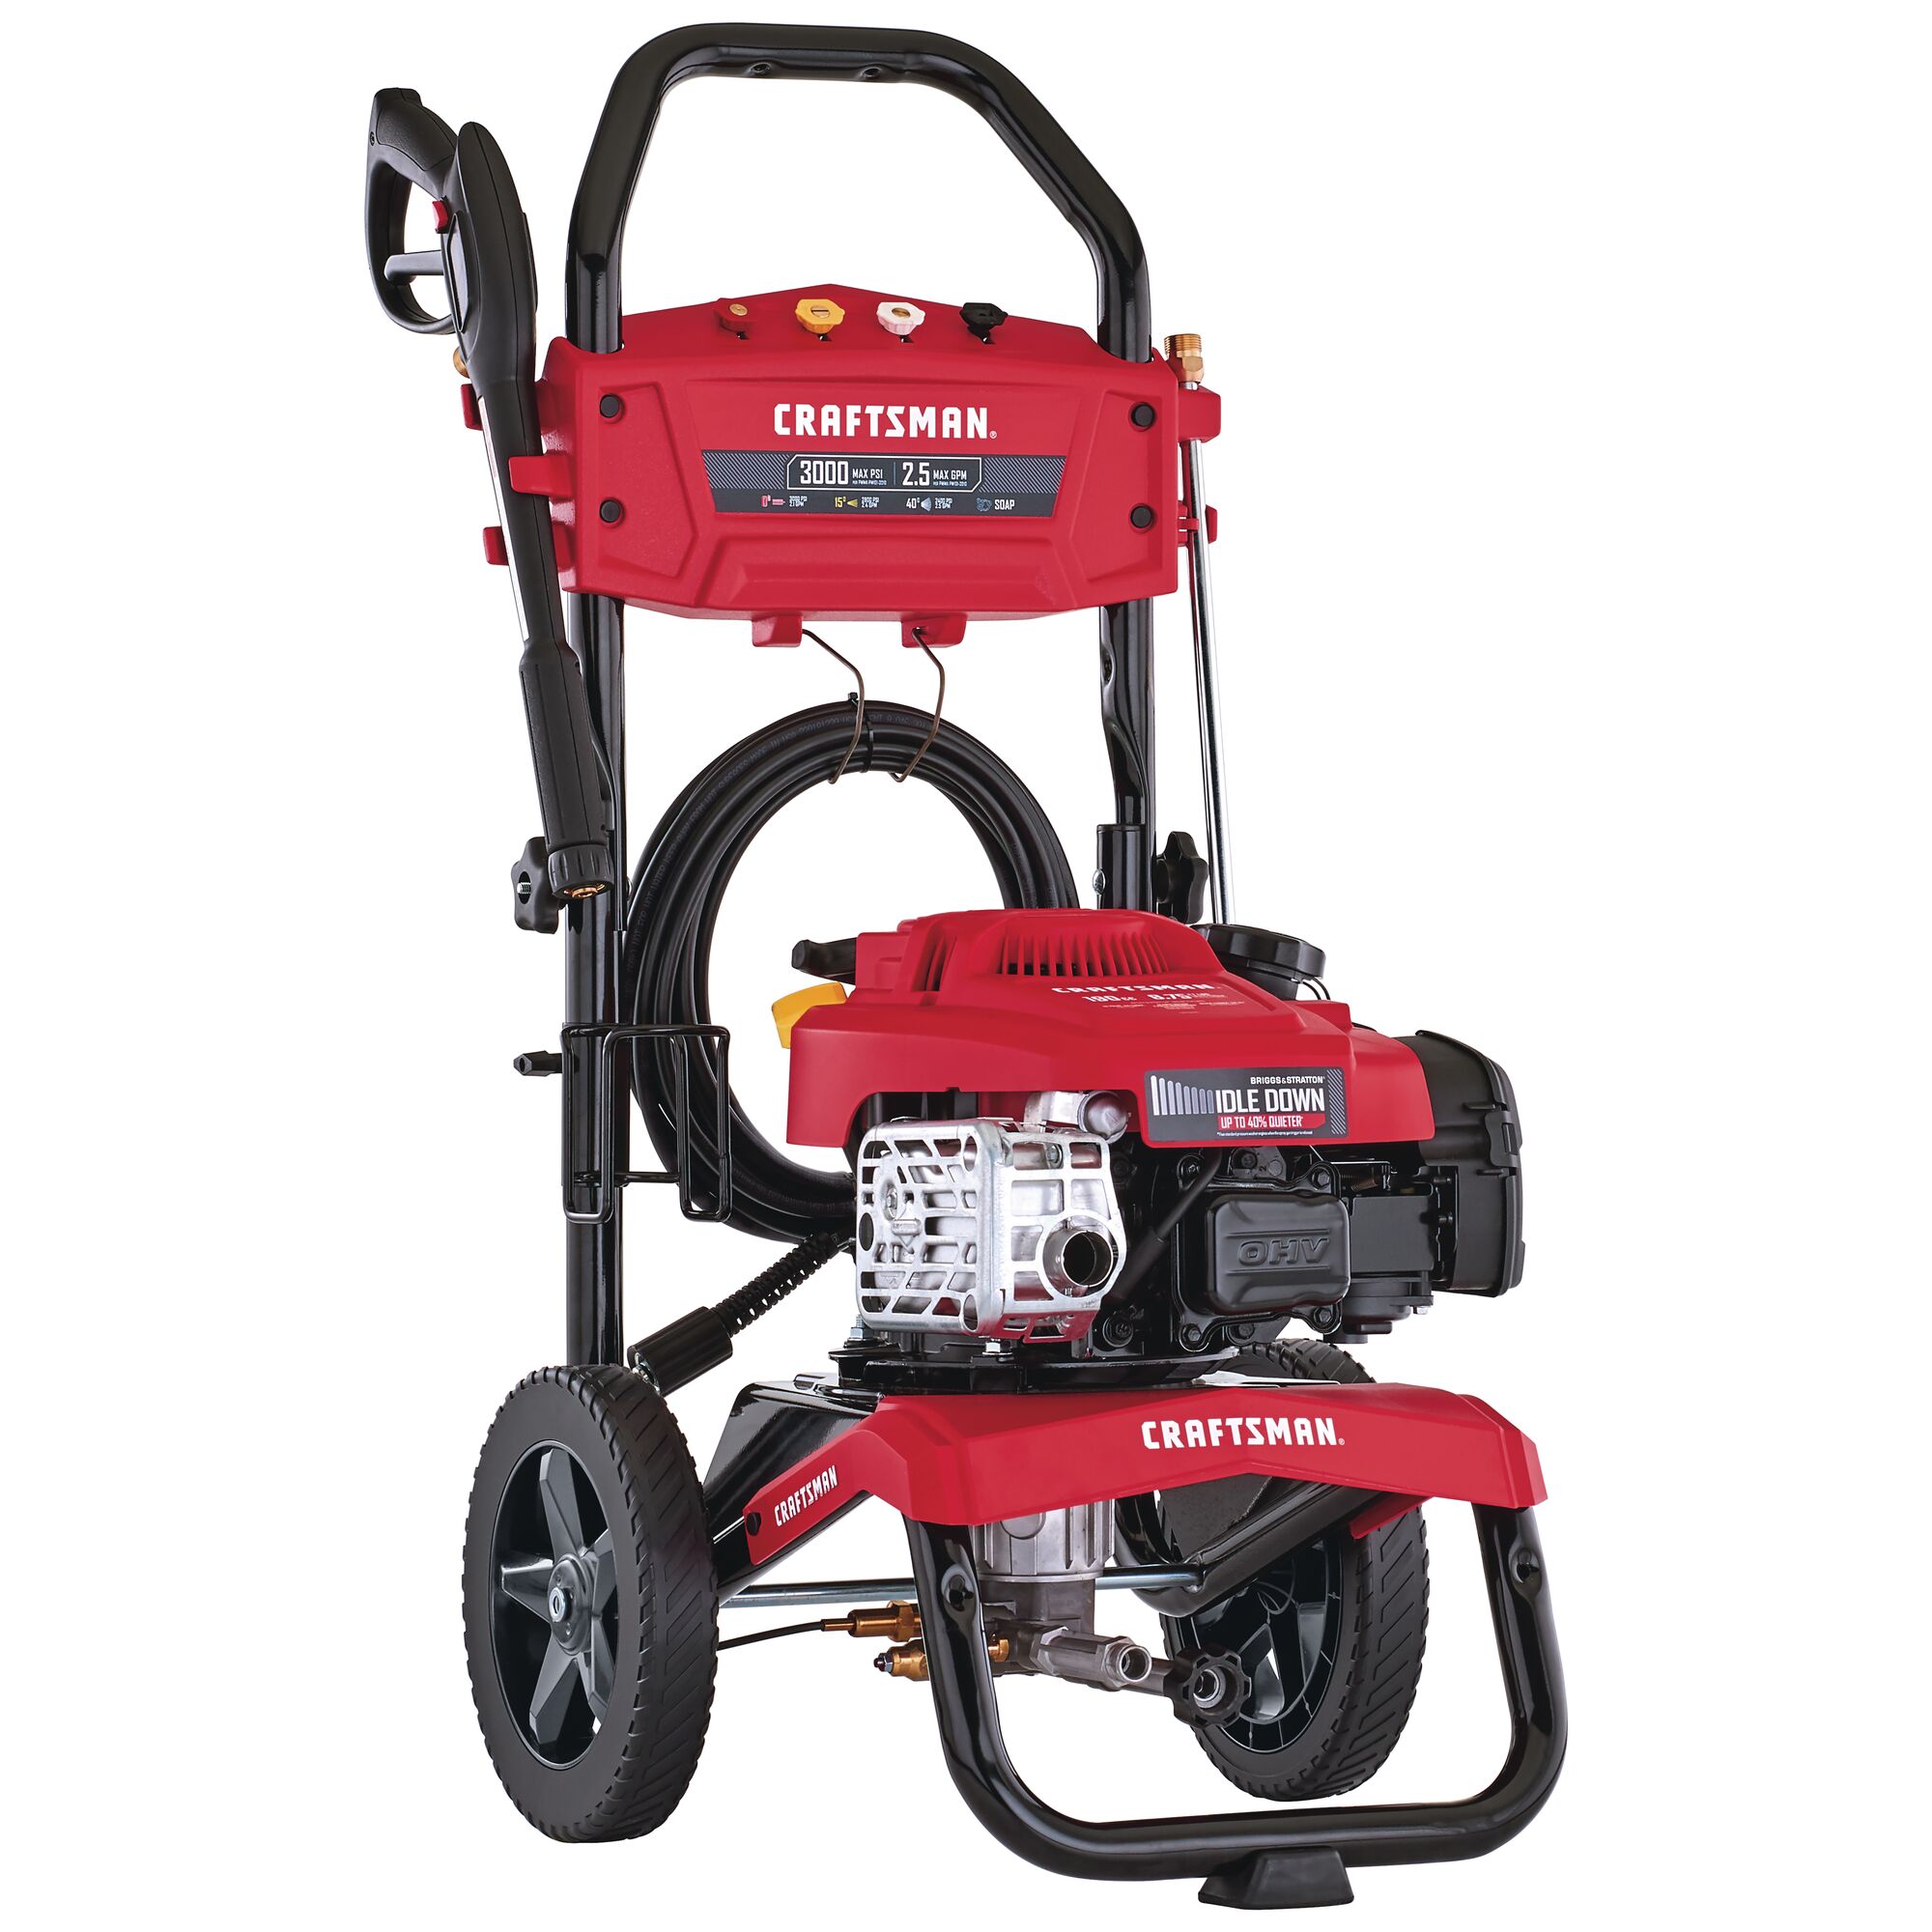 Left profile of 3000 MAX Pounds per Square Inch or 2 and five tenths MAX Gallons Per Minute Pressure Washer.